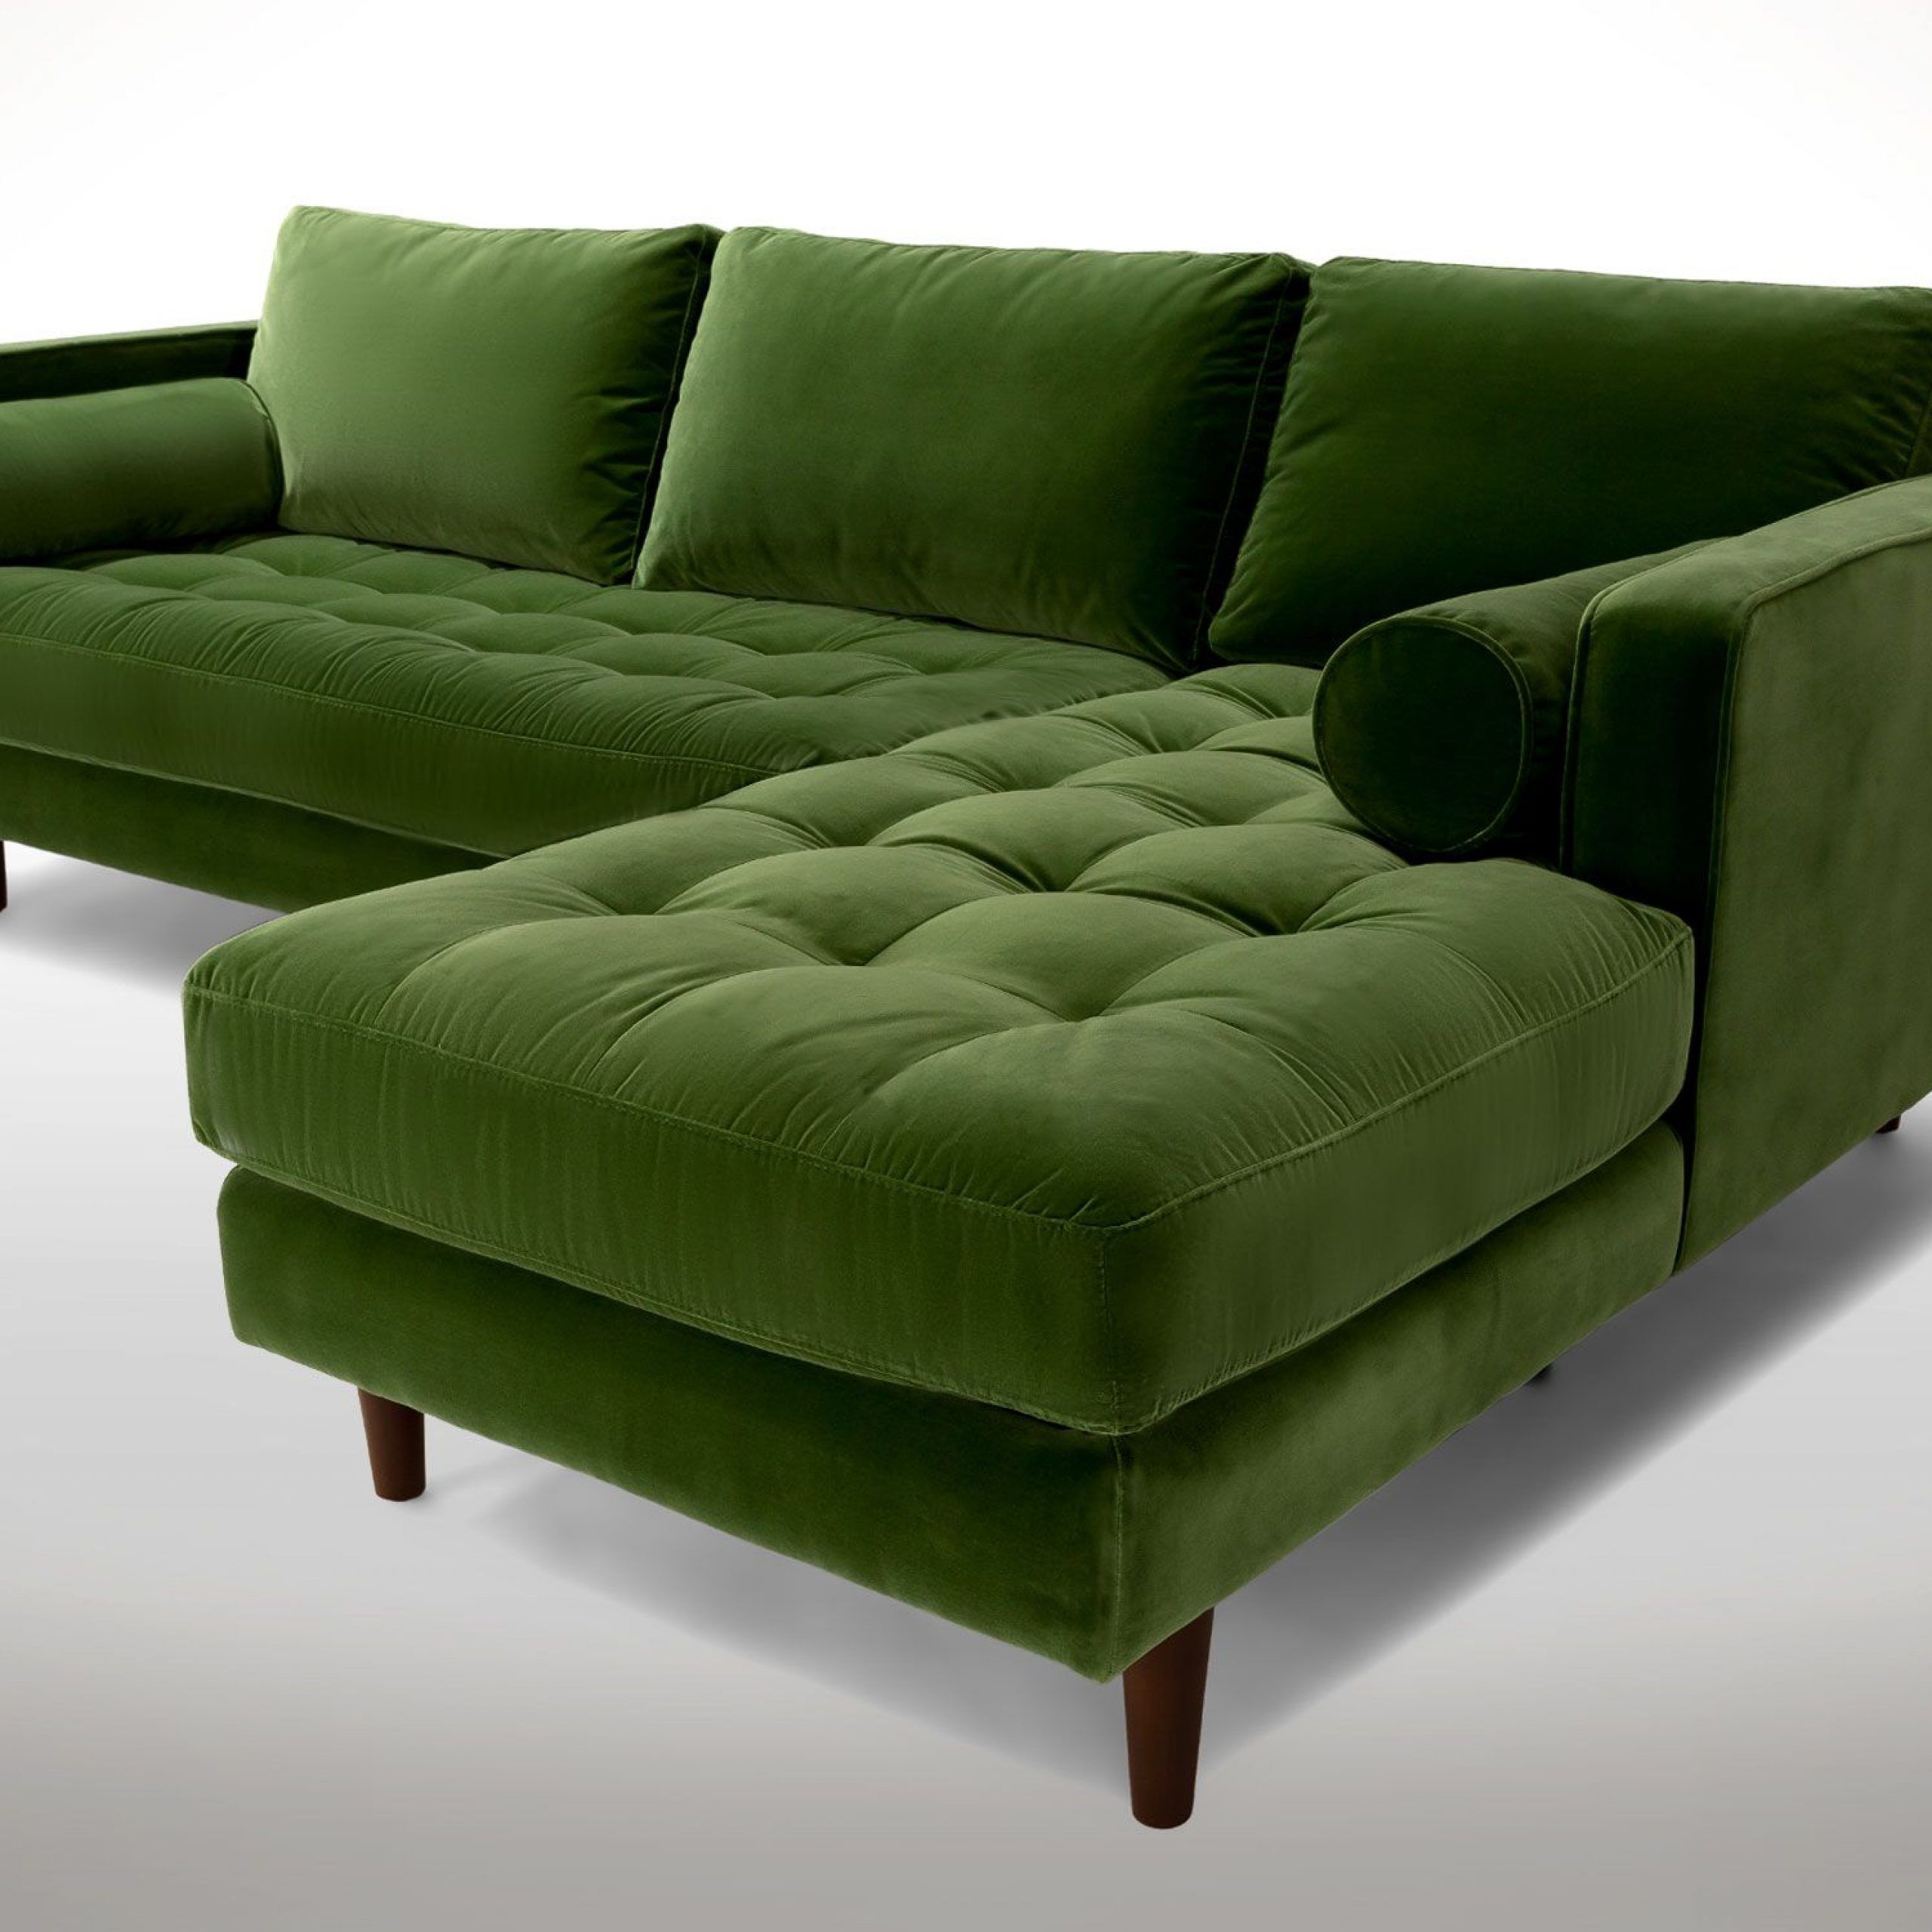 Sven Grass Green Right Sectional Sofa | Sectional Sofa In Florence Mid Century Modern Velvet Right Sectional Sofas (View 10 of 15)